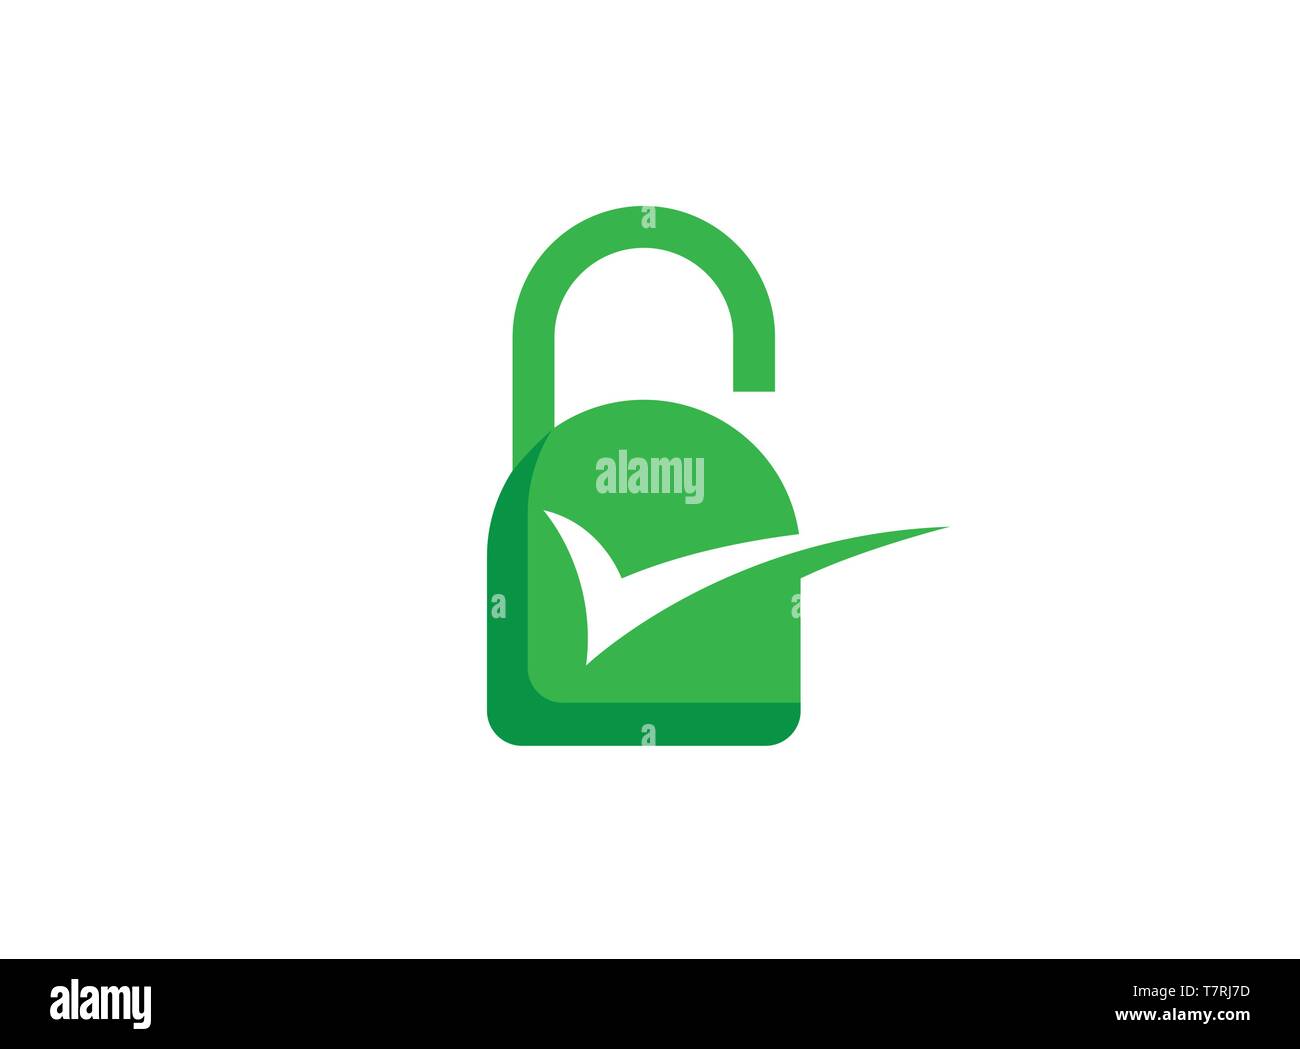 Web Security Lock and guard Icon logo design illustration on white background Stock Vector